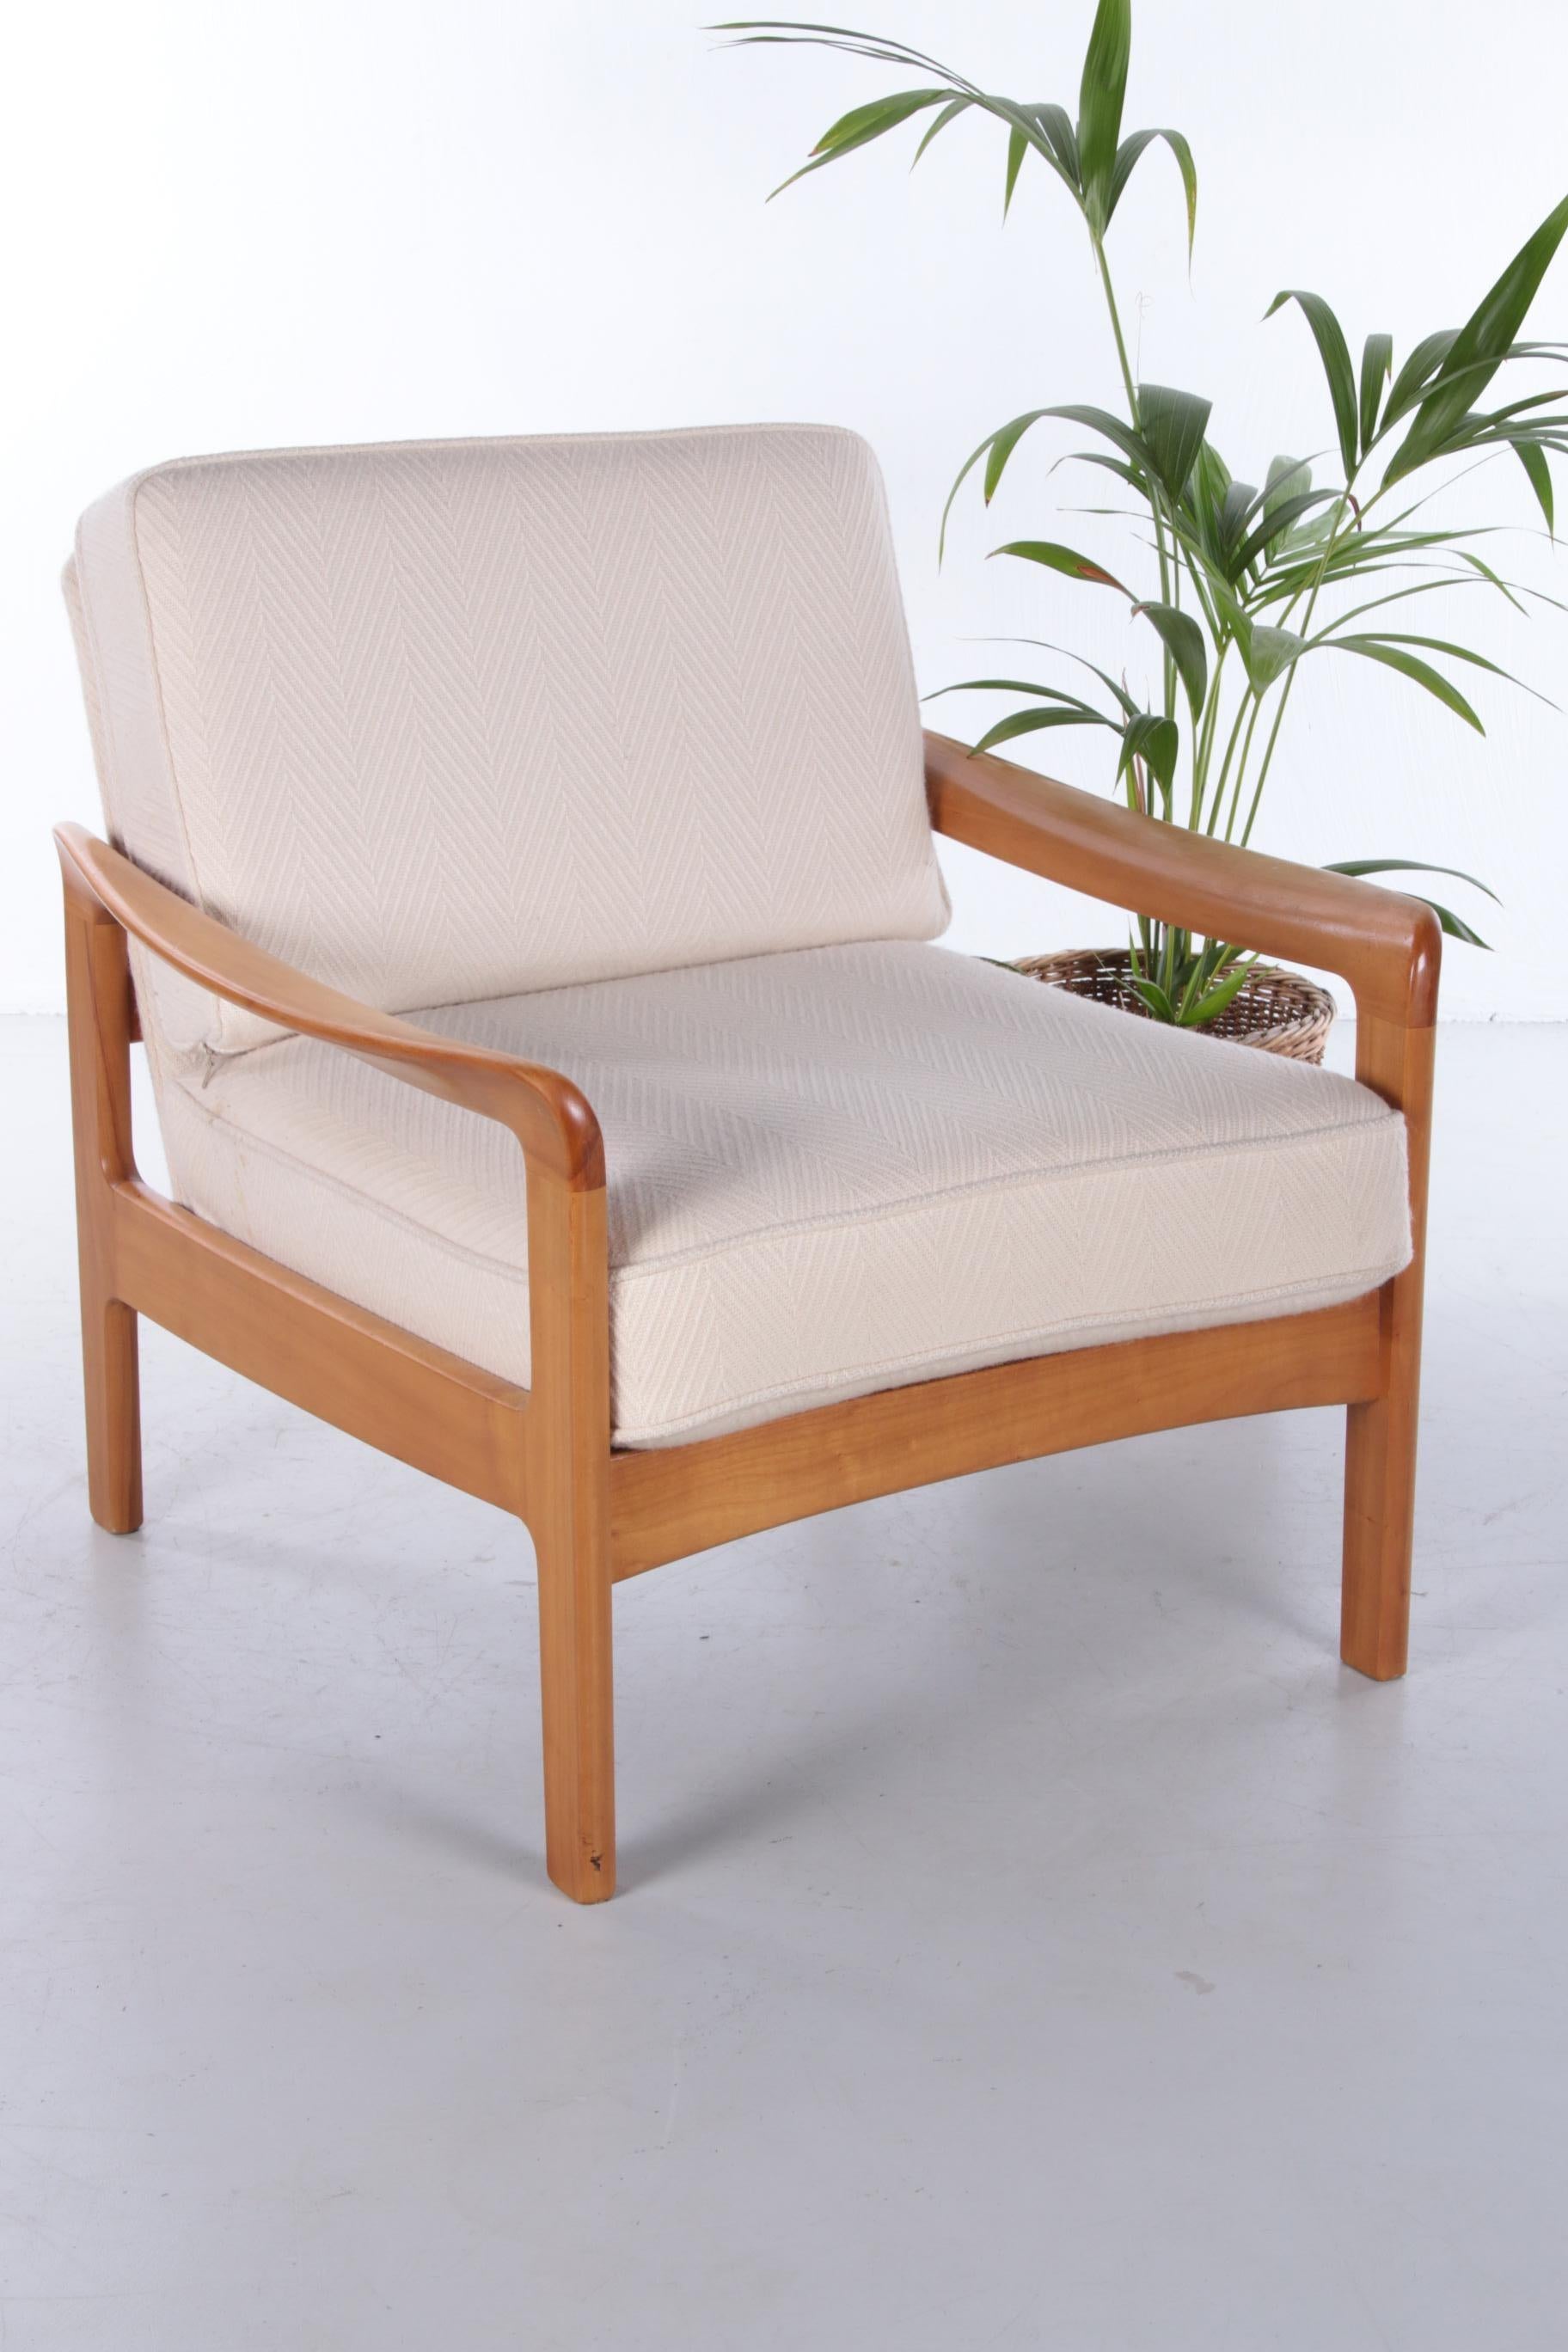 A beautiful Danish armchair in solid teak, this model is called the 'Senator', it was designed by Ole Wanscher and was made by Cado in the 60s-70s.
It is in excellent condition for its age, the teak frame is clean, sturdy and healthy with only some